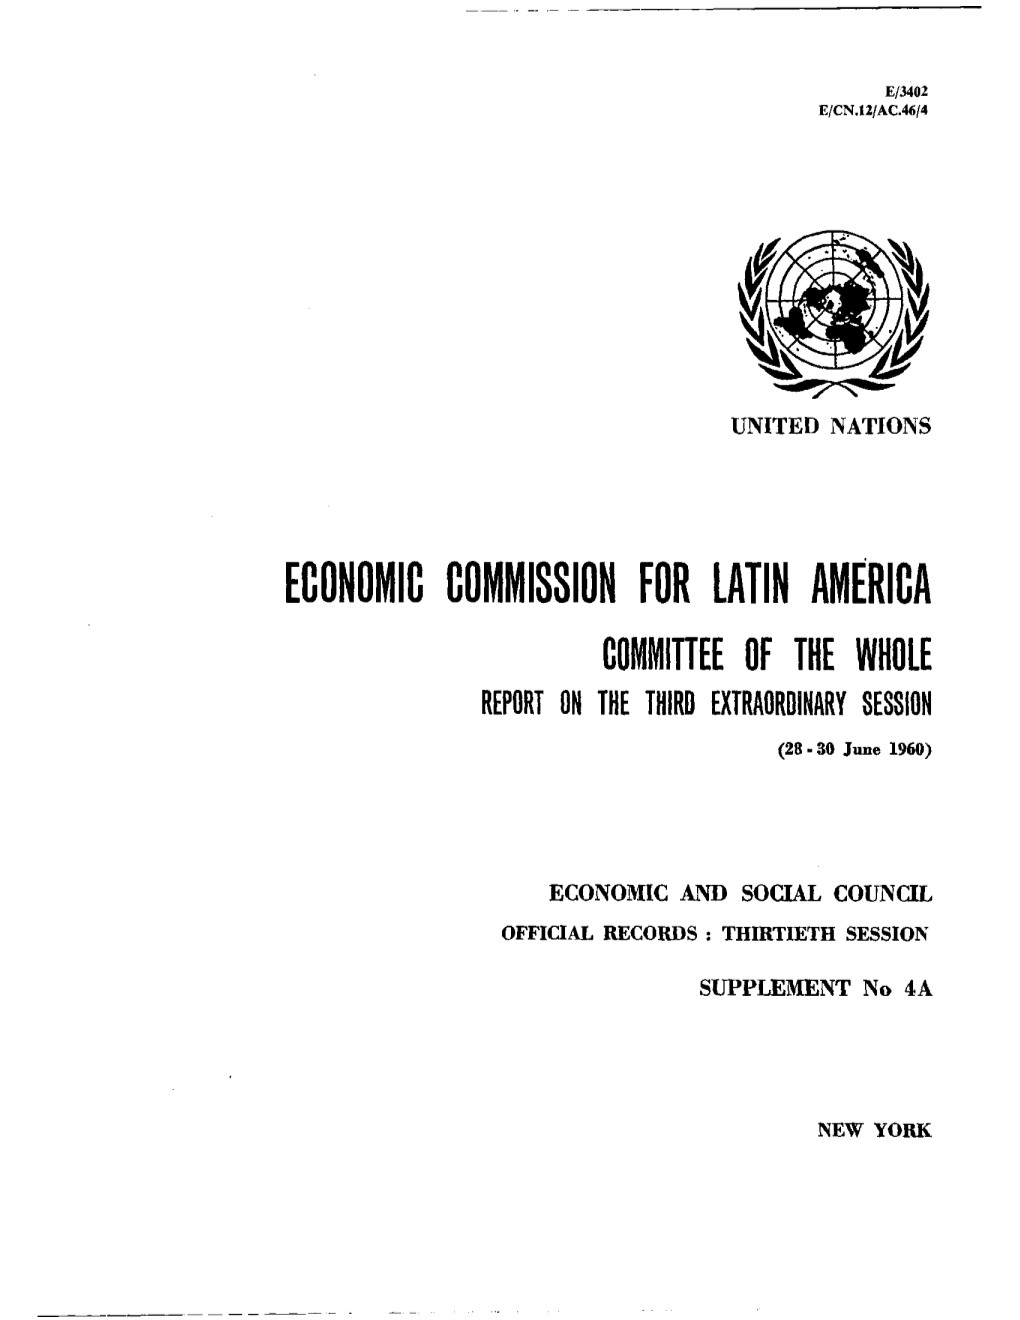 Economic Commission for Latin America Committee of the Whole Report on the Third Extraordinary Session